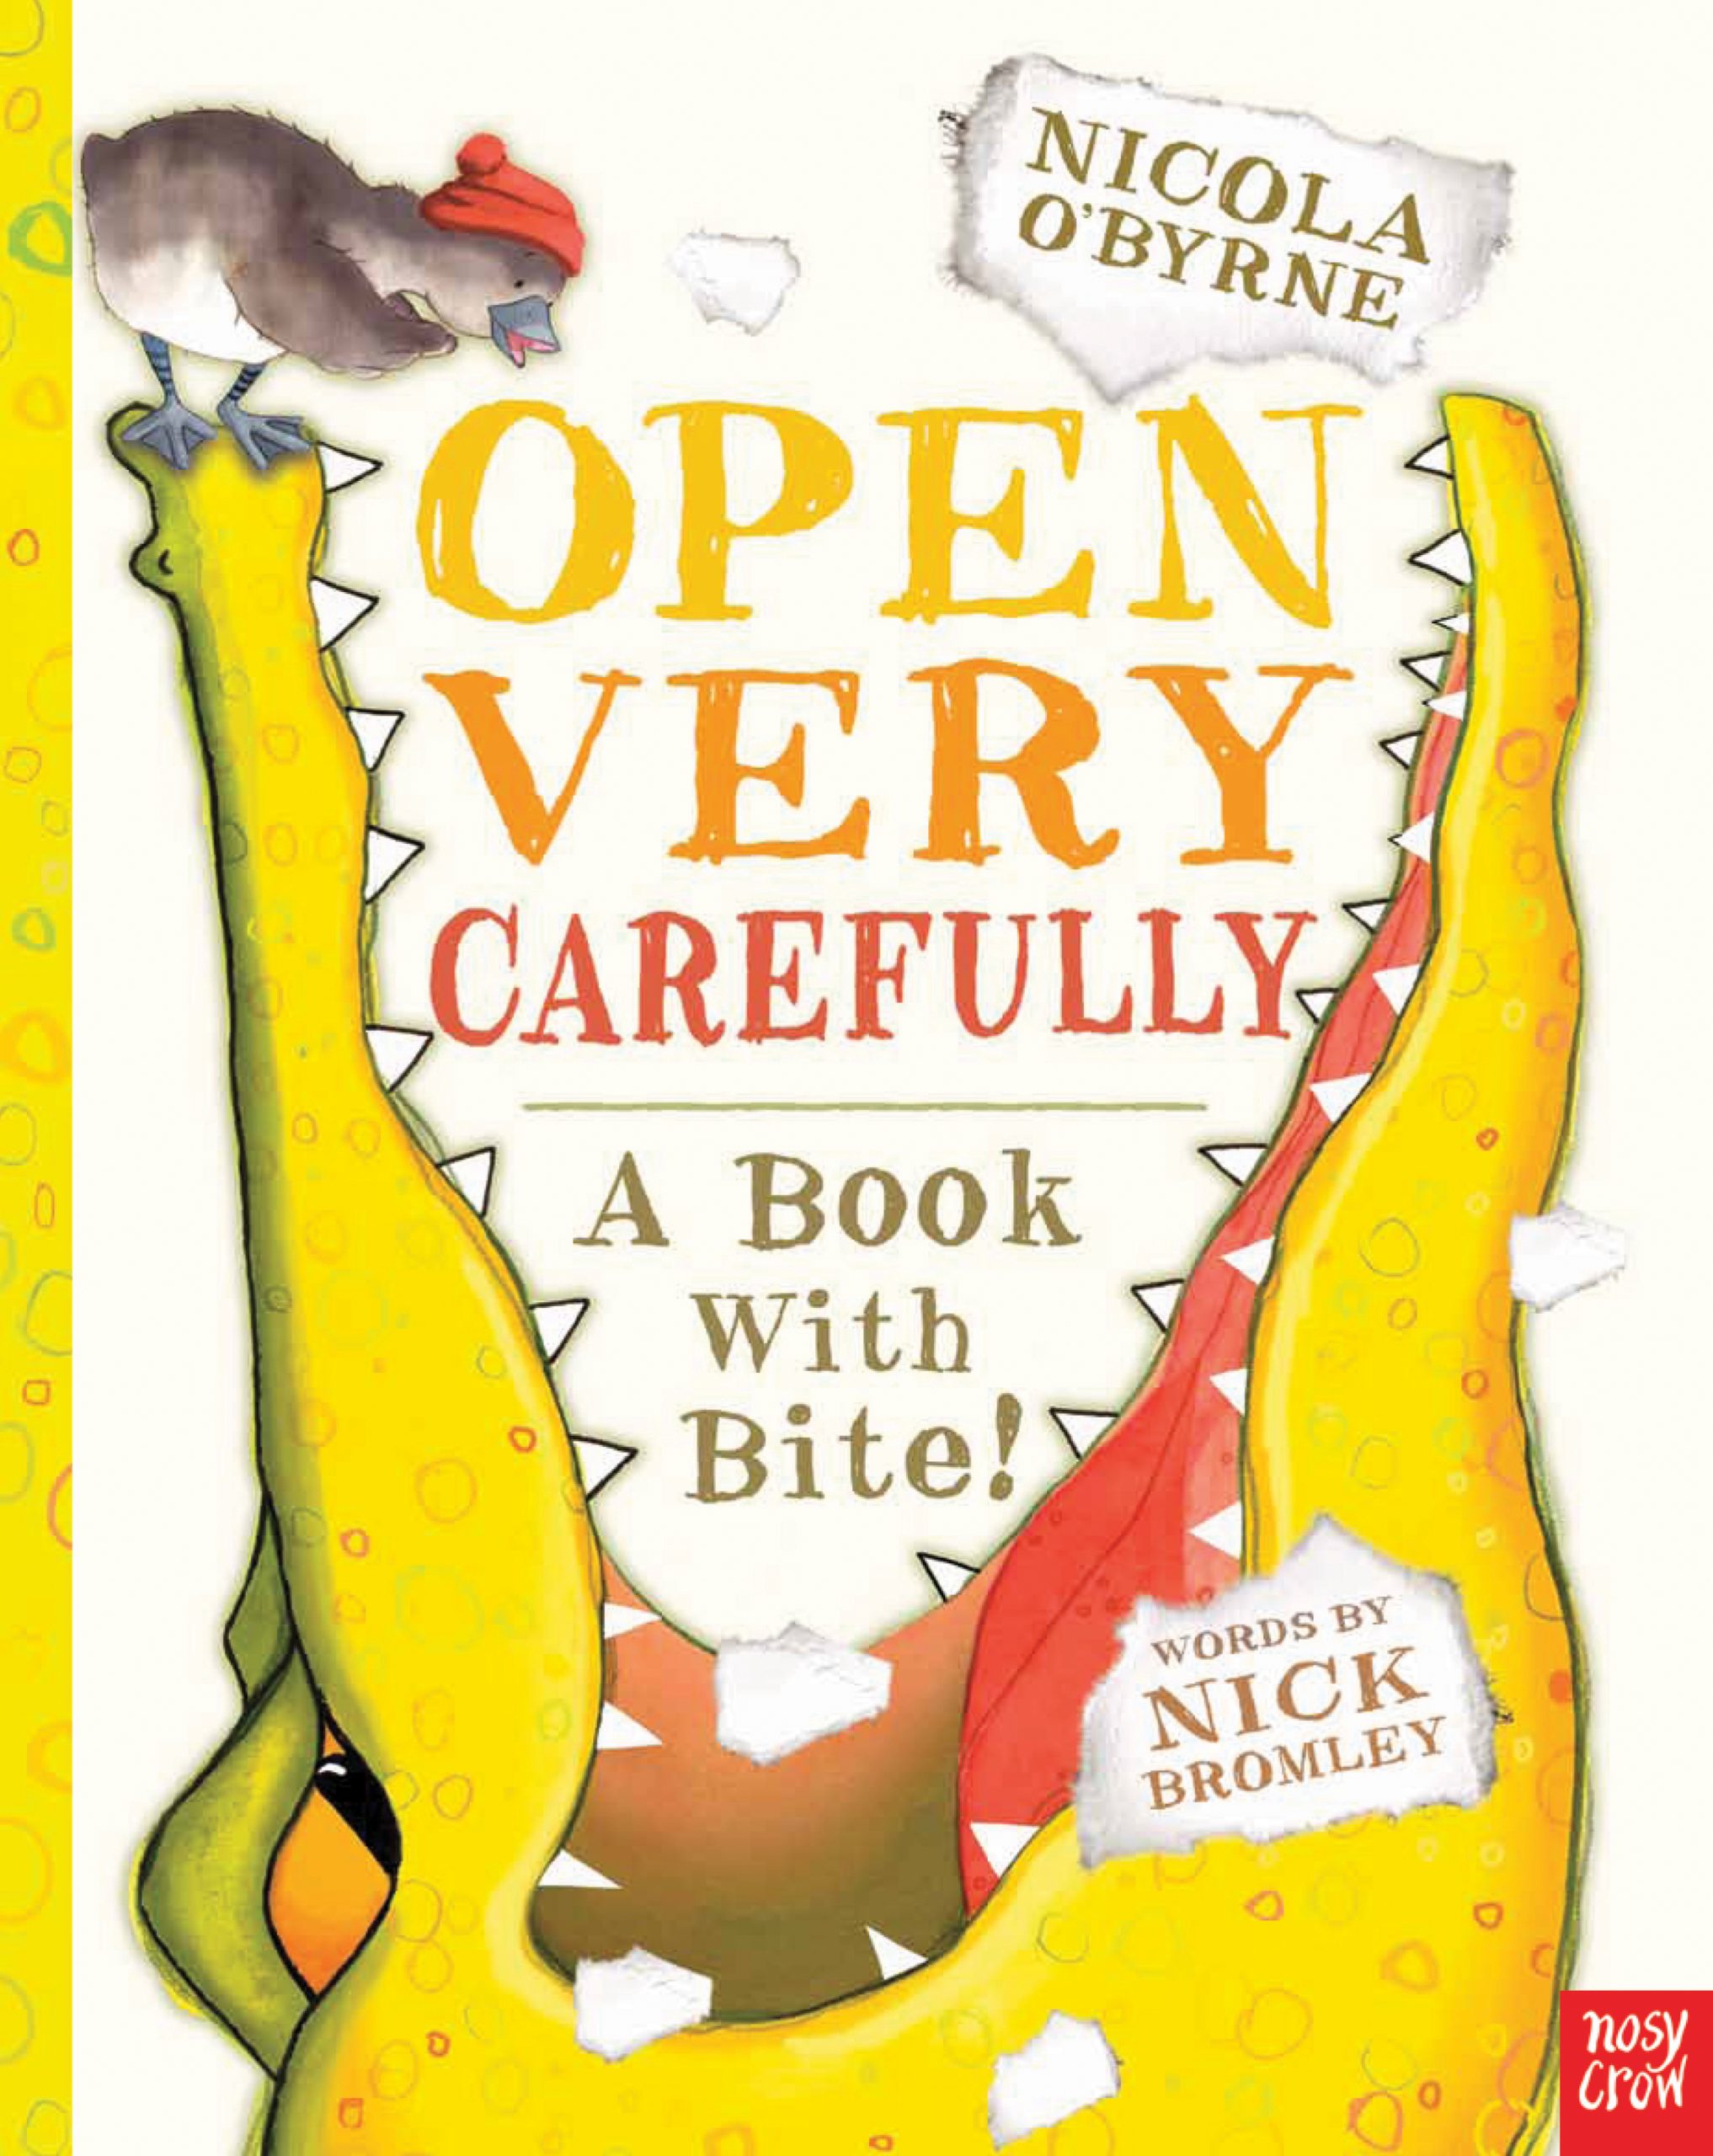 Open Very Carefully | Nicola O'Byrne and Nick Bromley